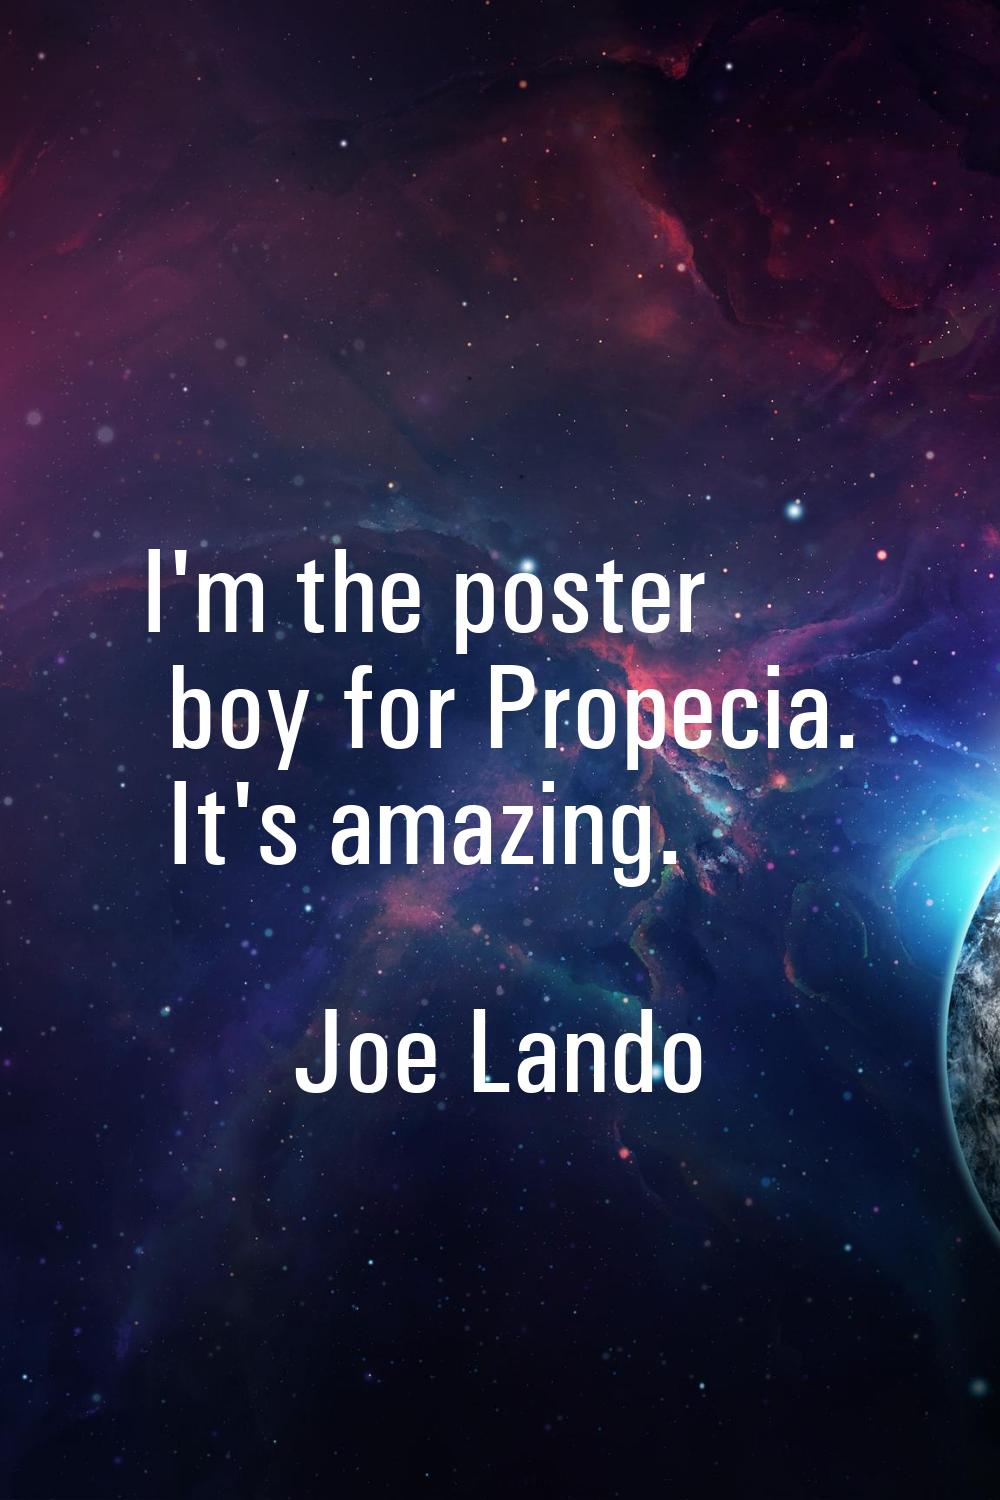 I'm the poster boy for Propecia. It's amazing.